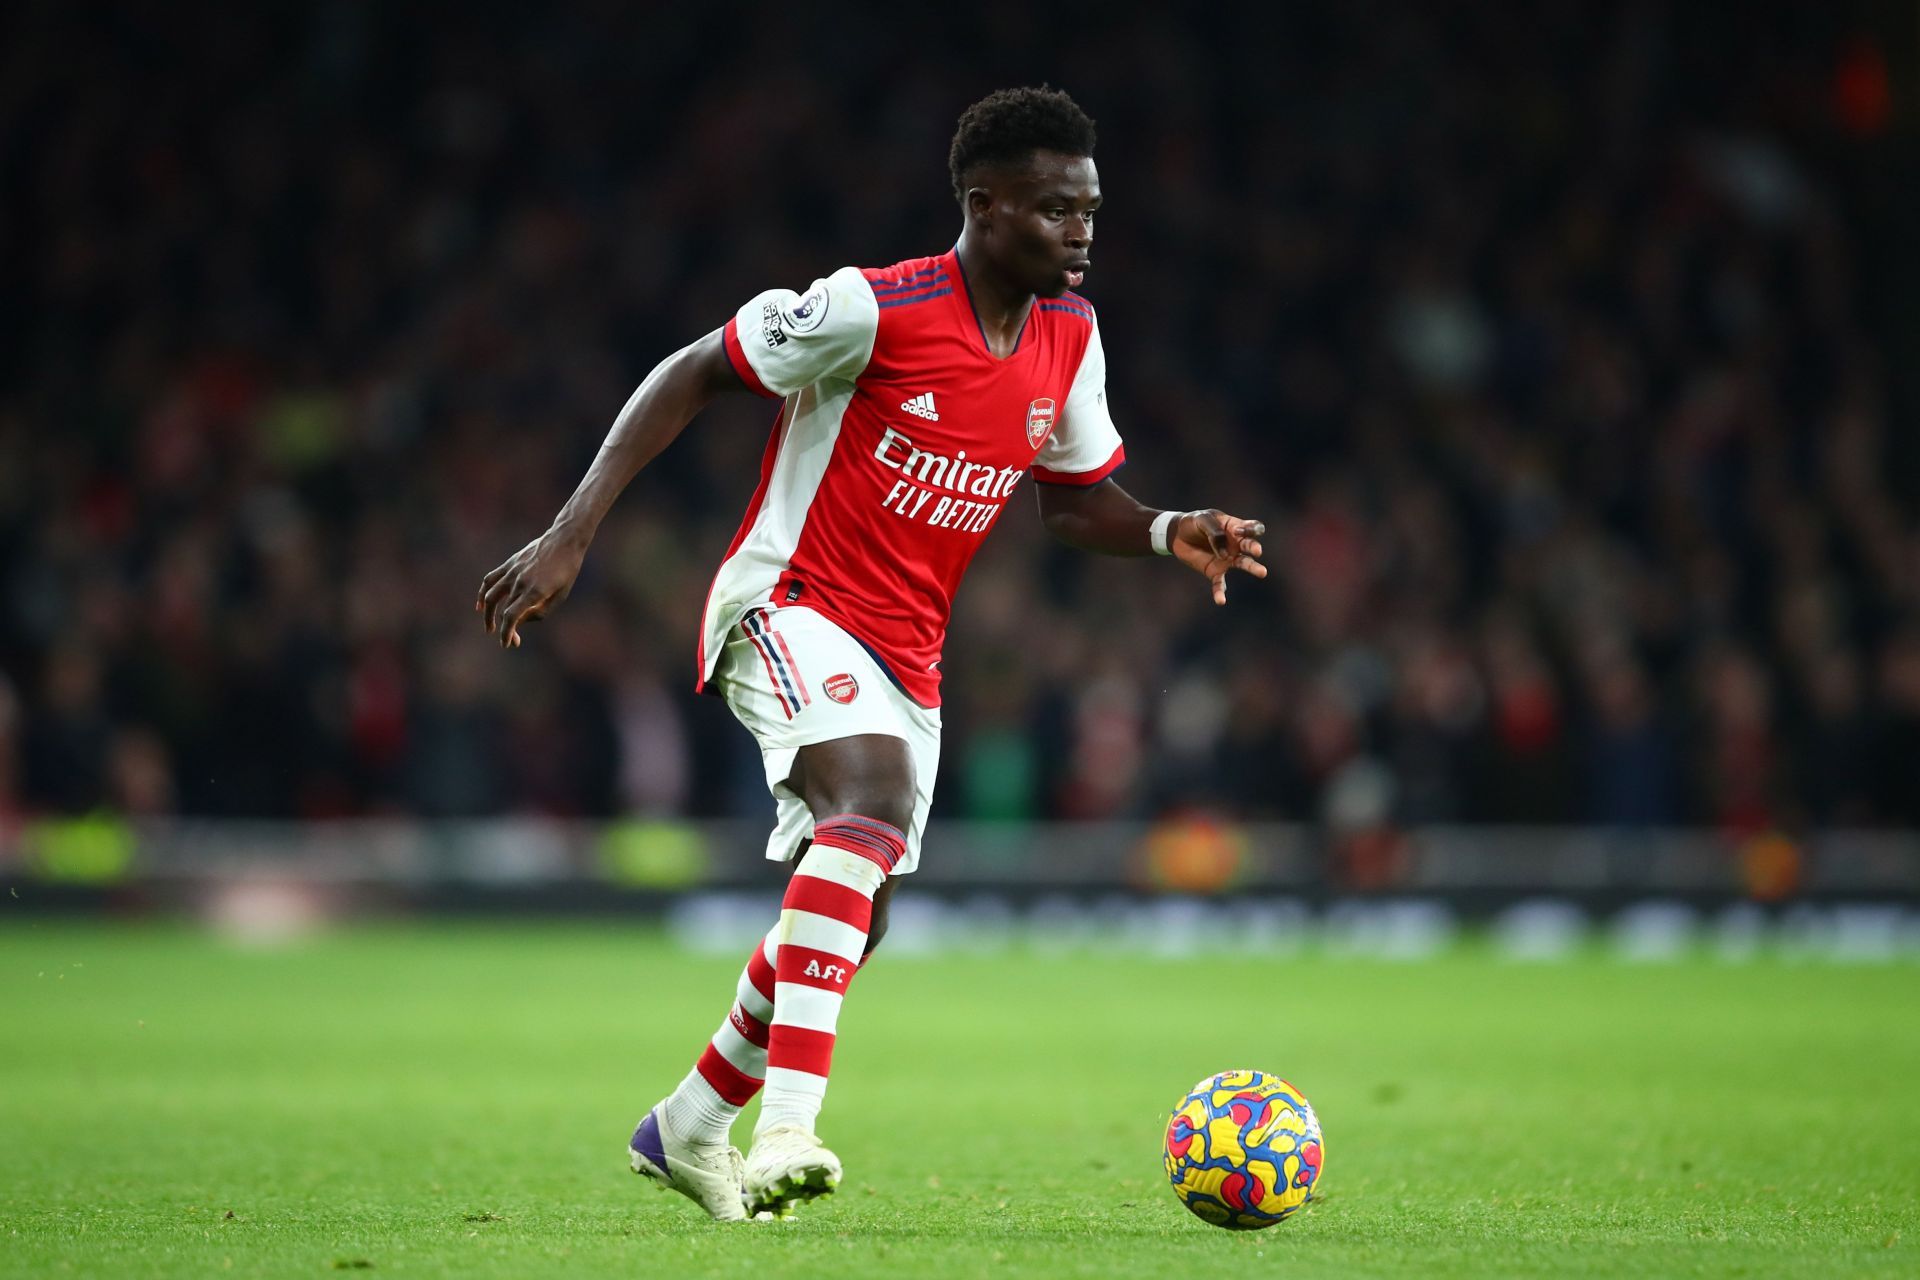 Arsenal forward Bukayo Saka is one of the brightest talents in the Premier League.